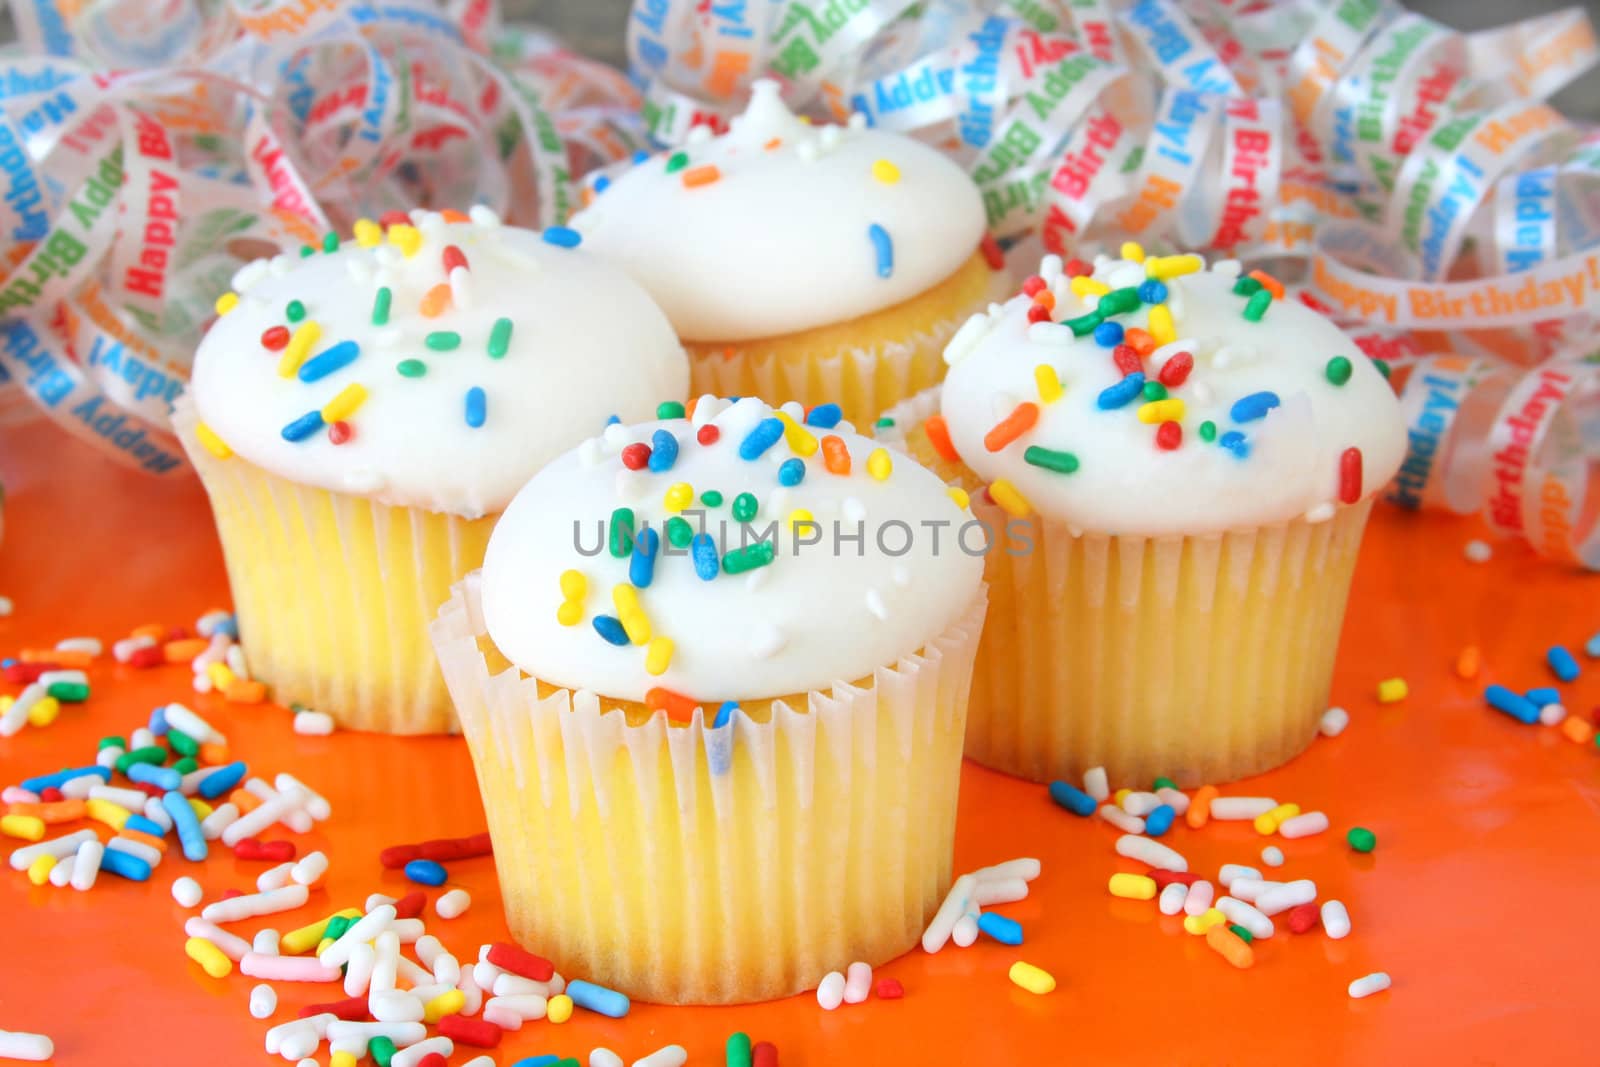 Cupcakes with sprinkles sitting on an orange background.